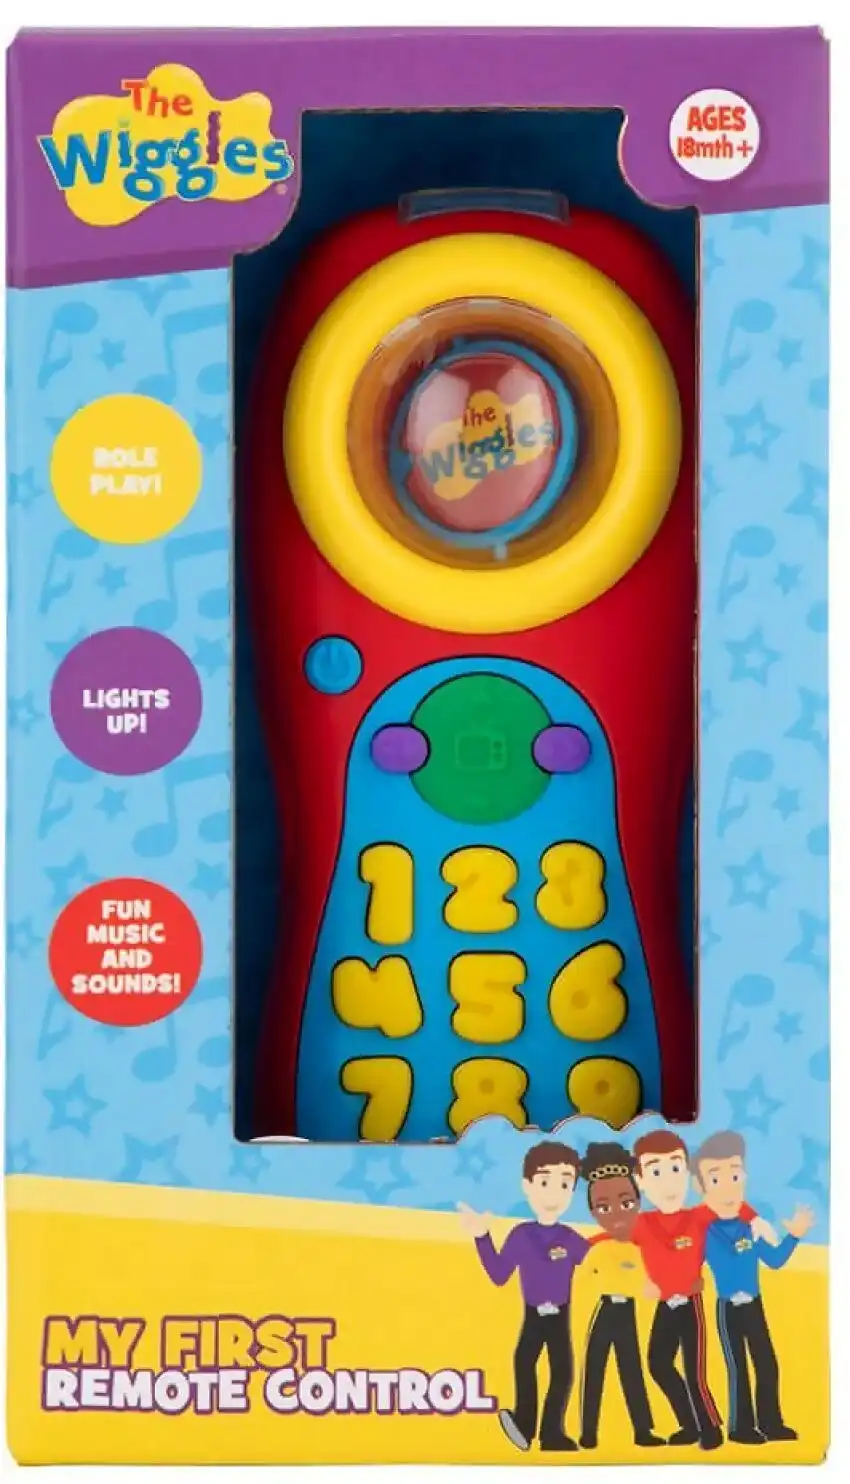 The Wiggles - My First Remote Control